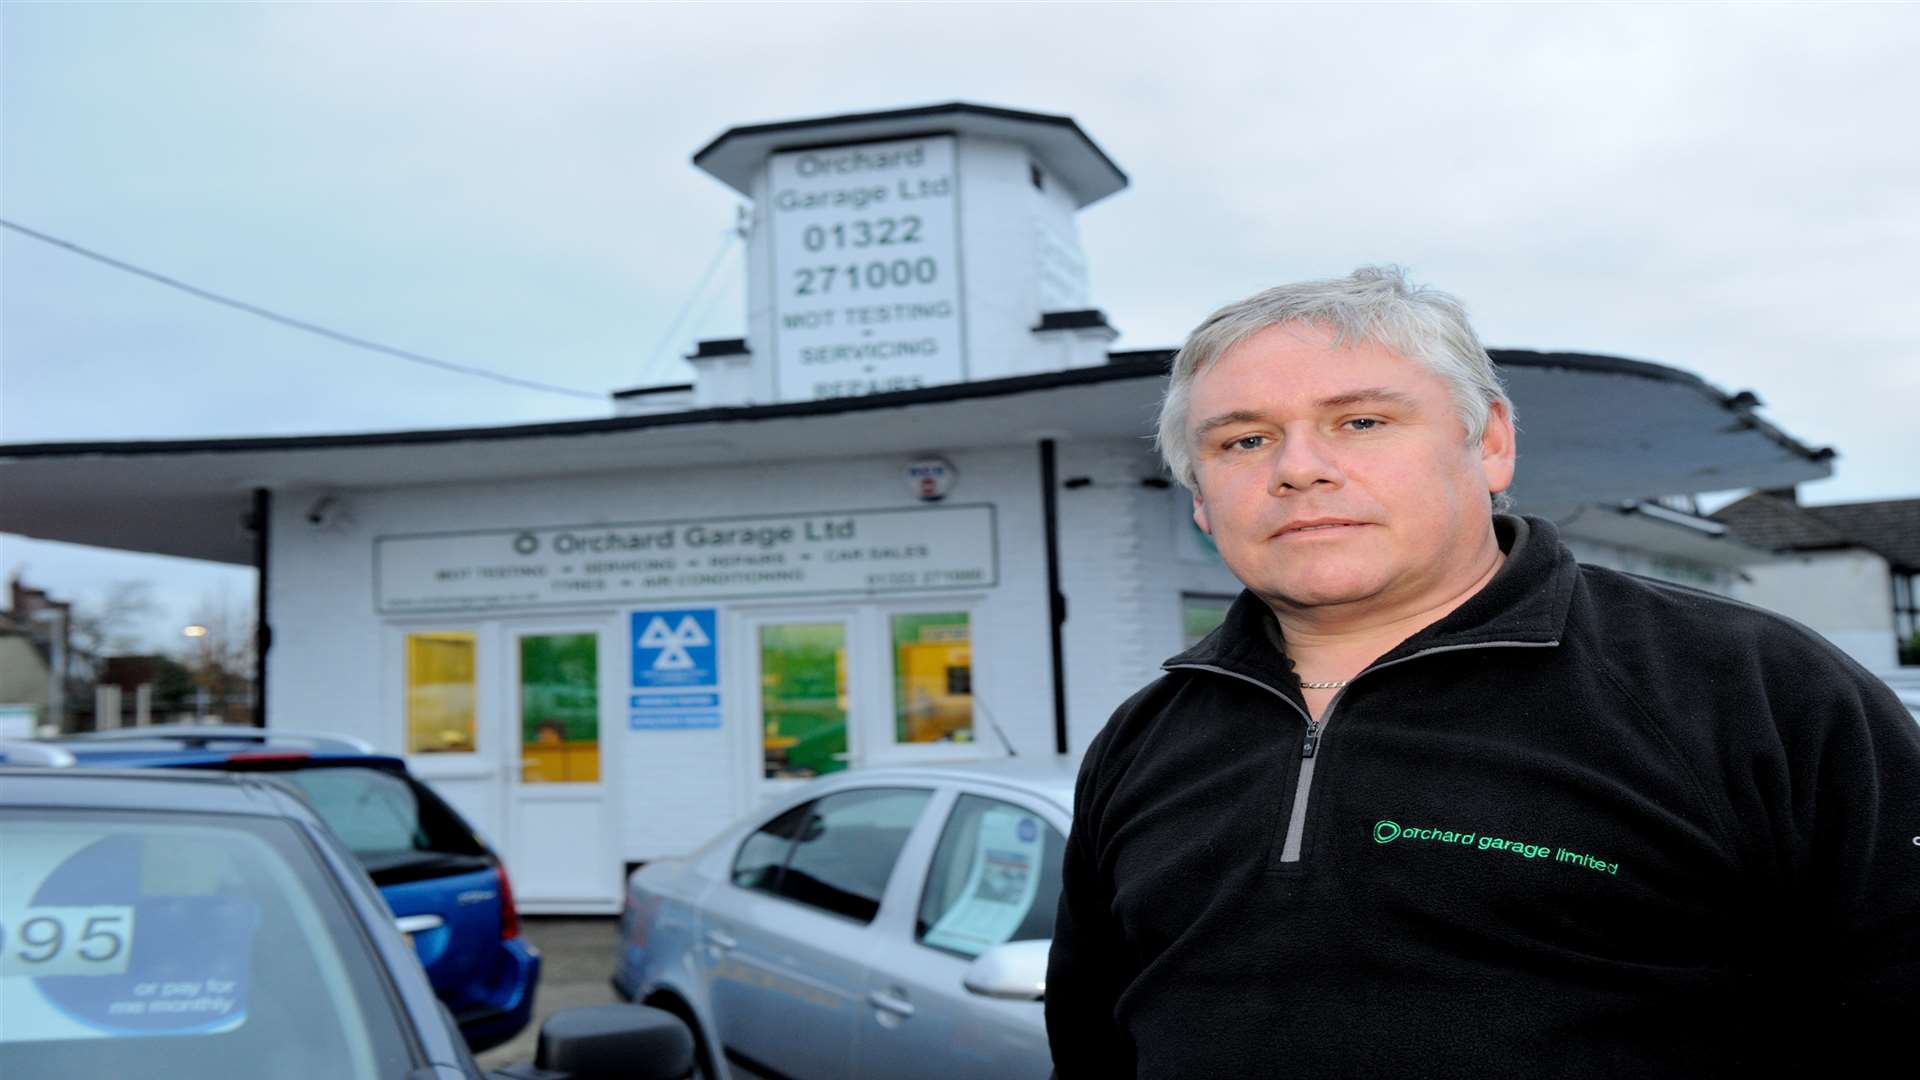 Dave Breeze, owner of the Orchard Garage in Park Road, is also experiencing long tailbacks outside his business